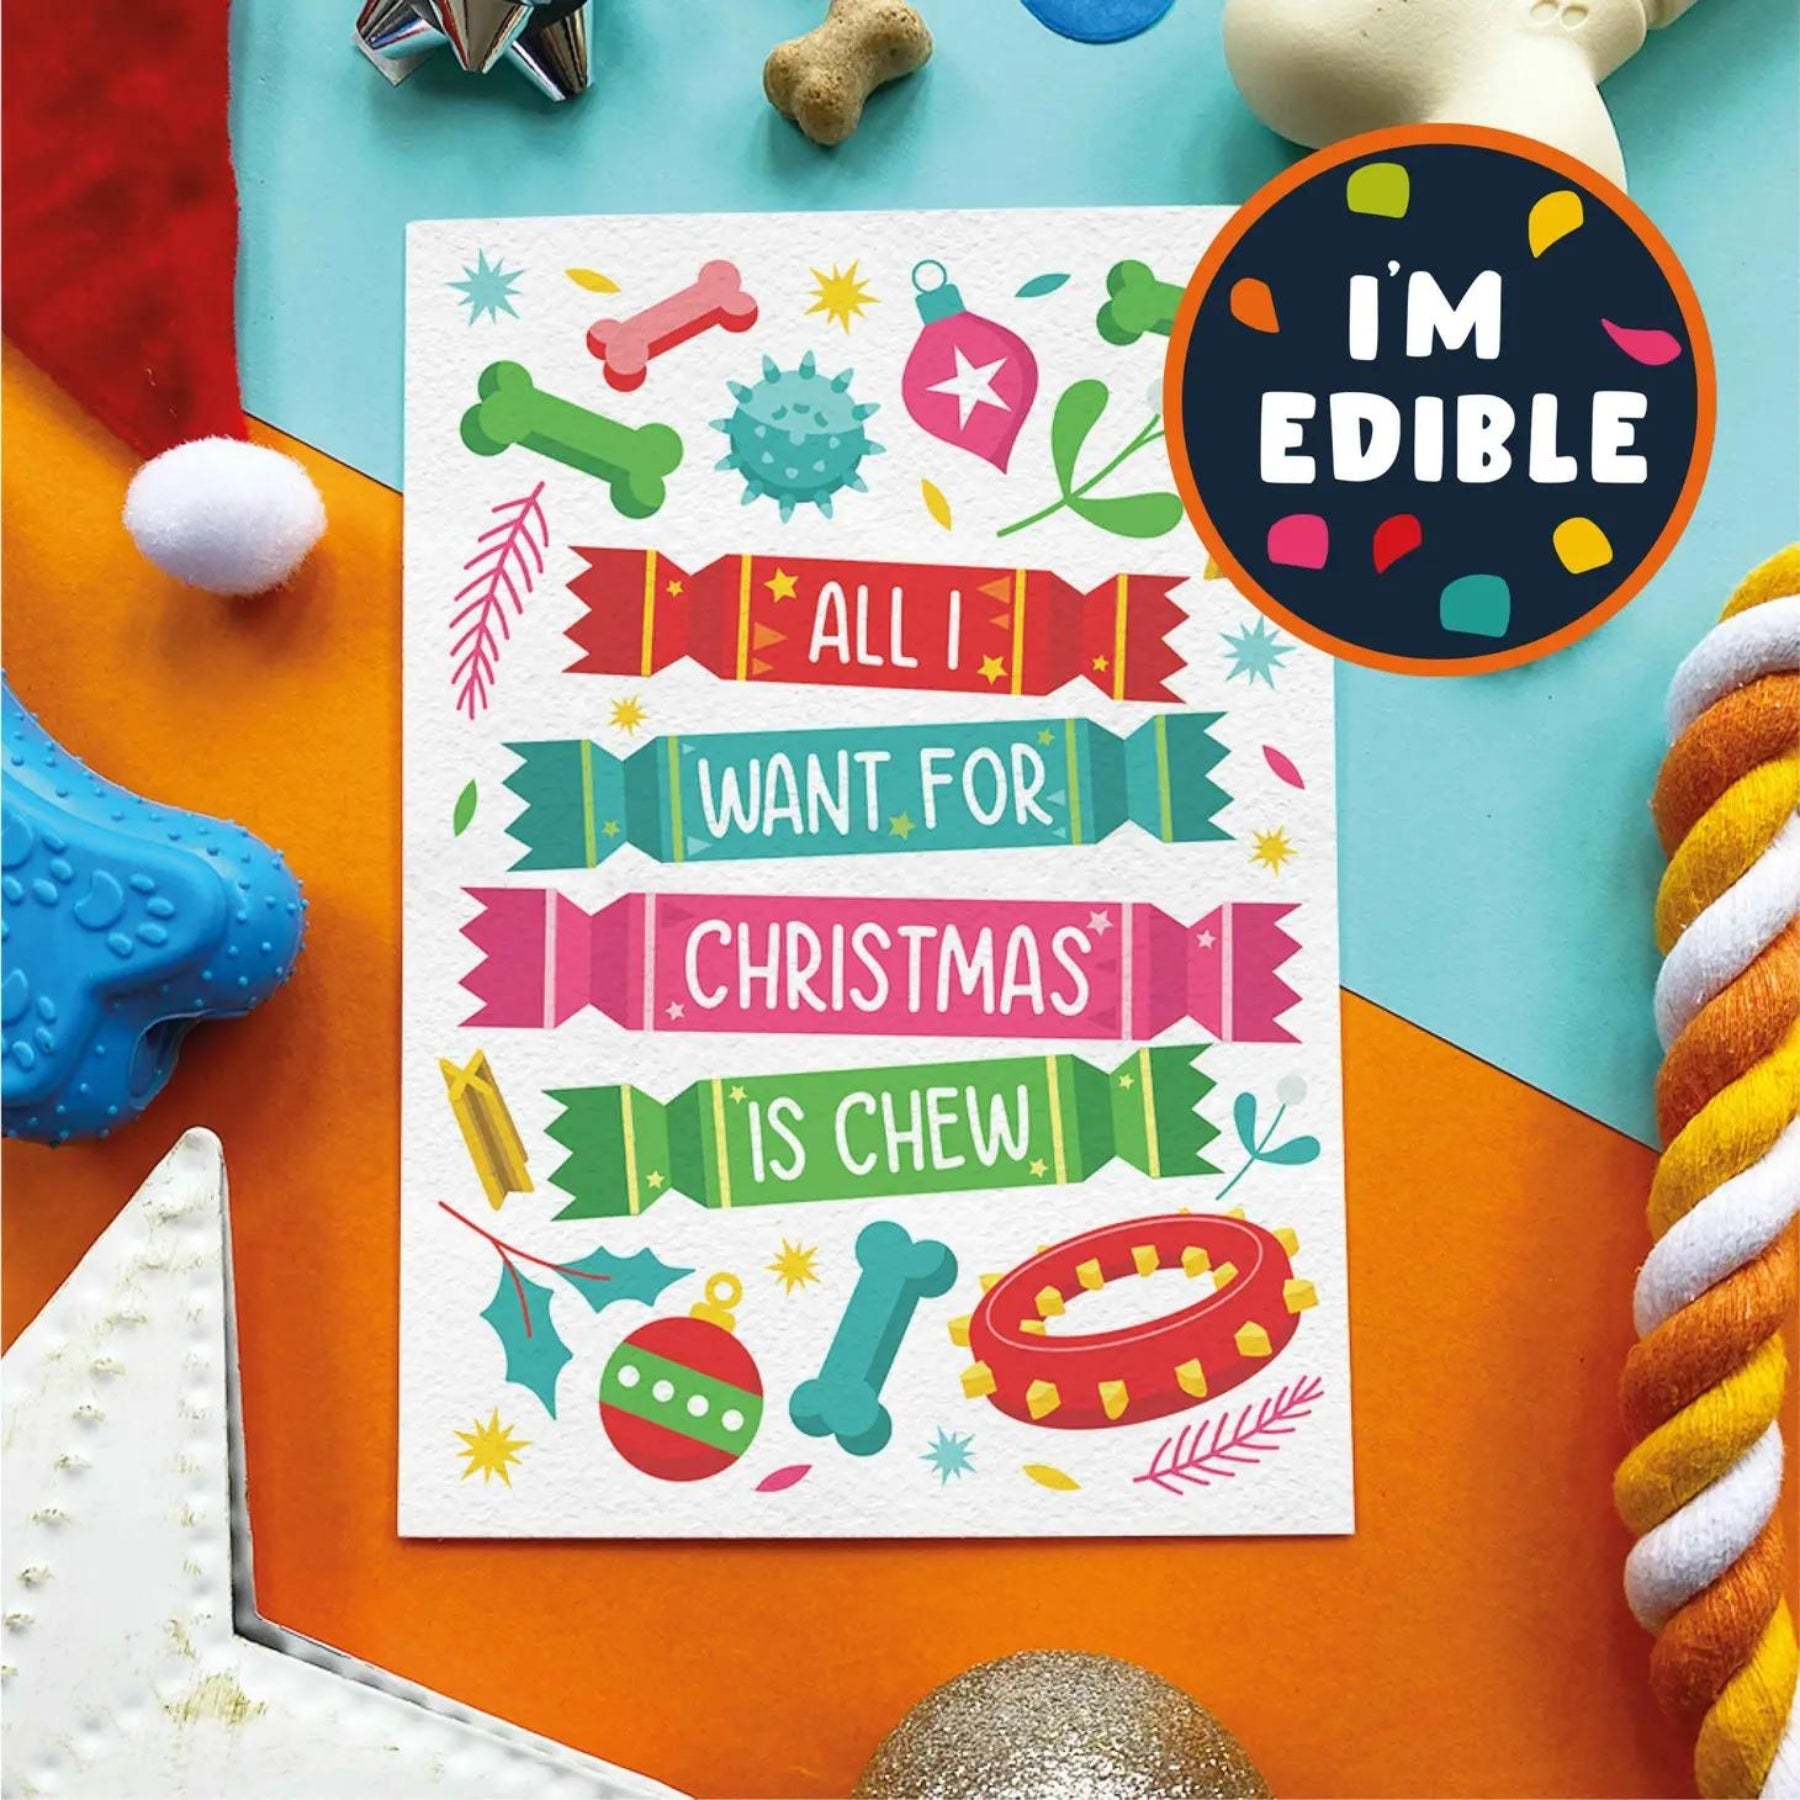 Edible Card For Dogs - All I Want For Christmas Is Chew - Pooch Luxury